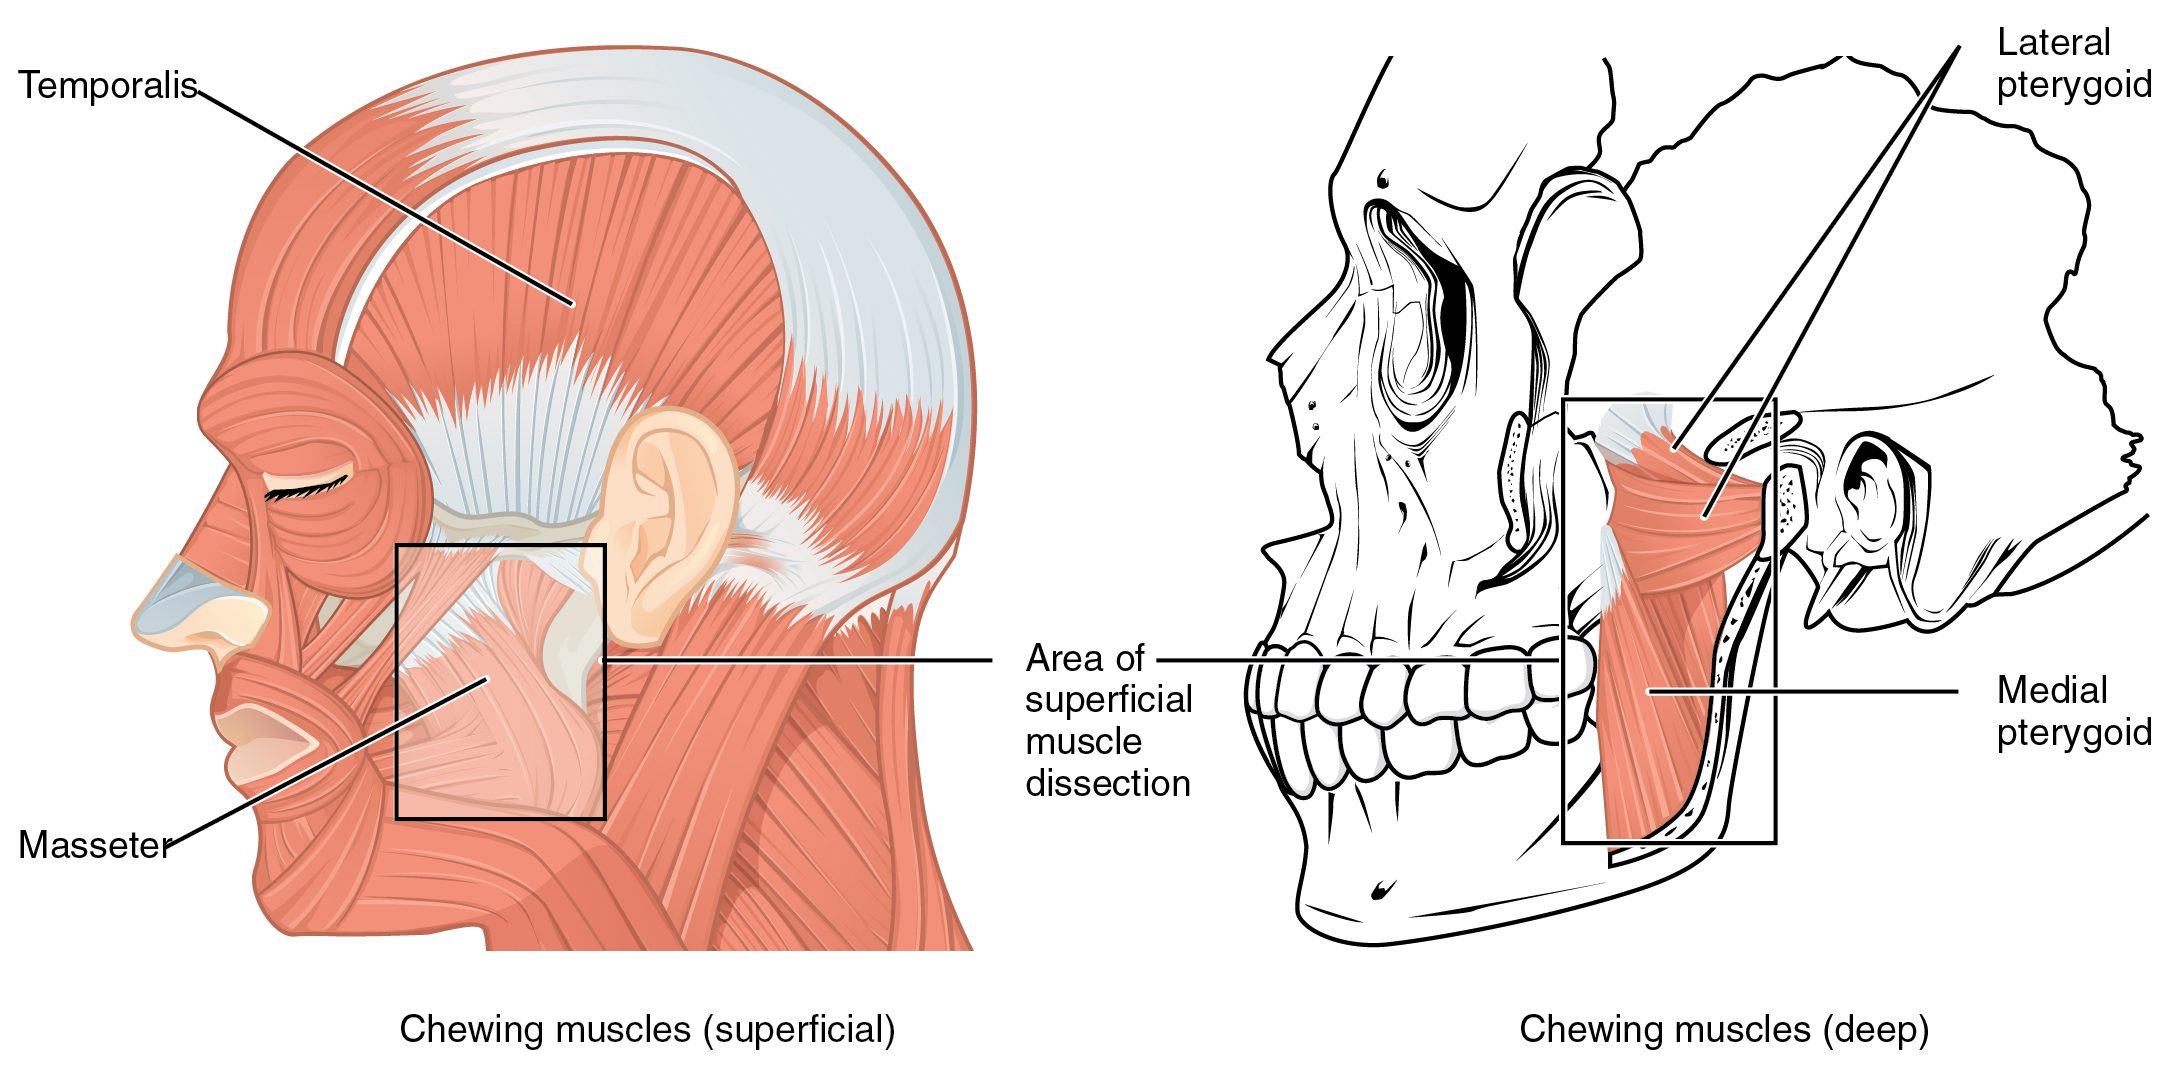 Lateral view of head showing superficial muscles and lateral view of skull showing chewing muscles